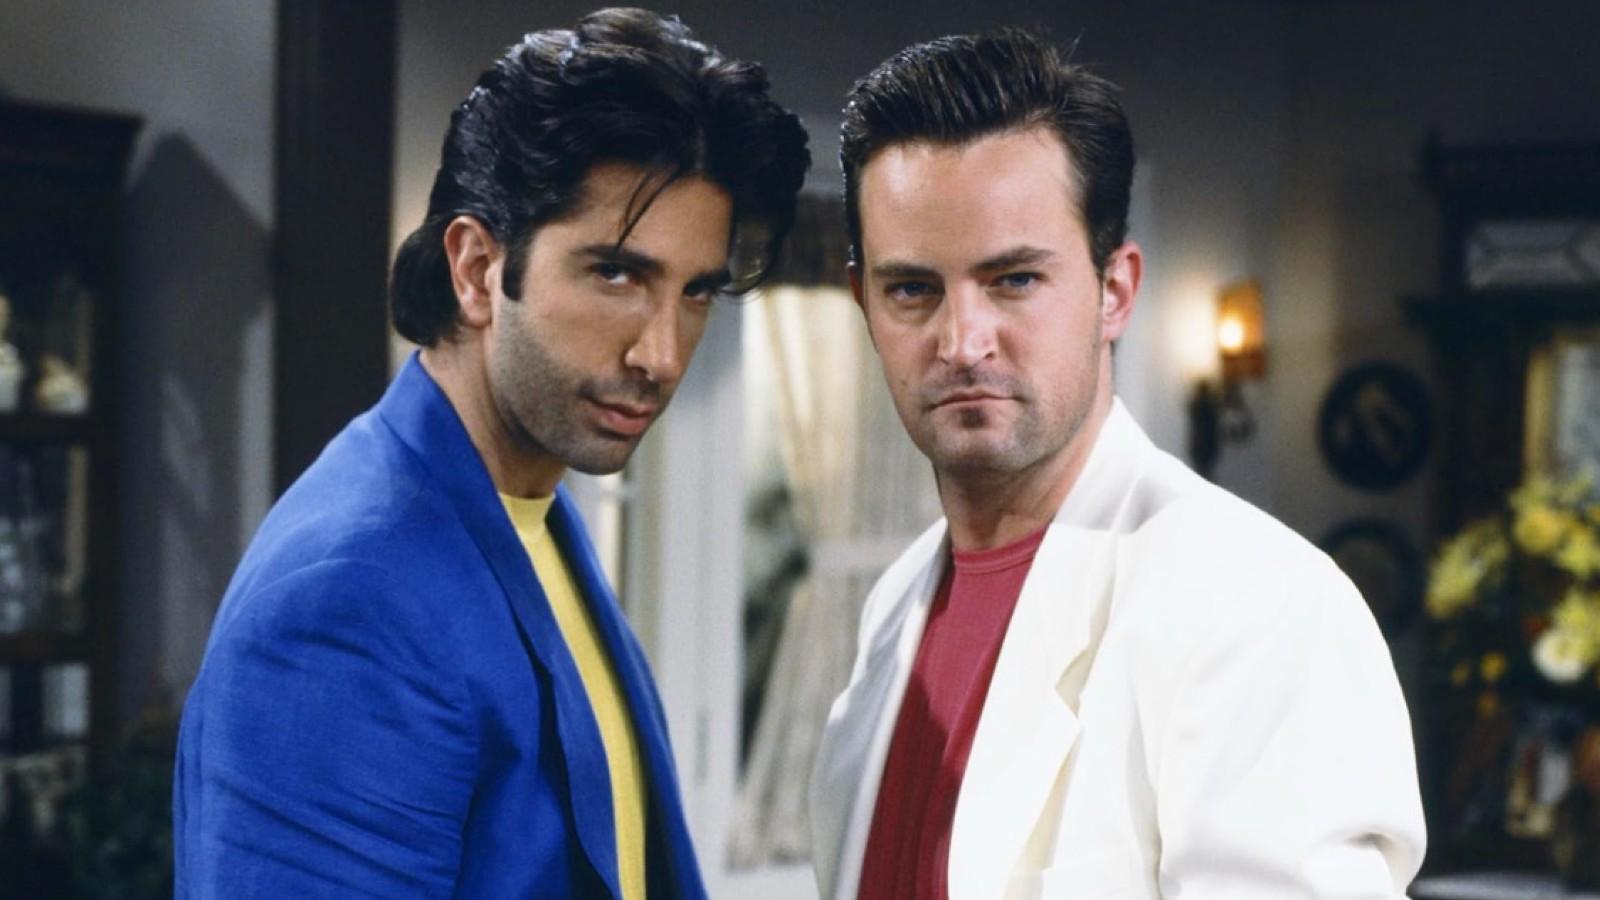 David Schwimmer and Matthew Perry in Friends